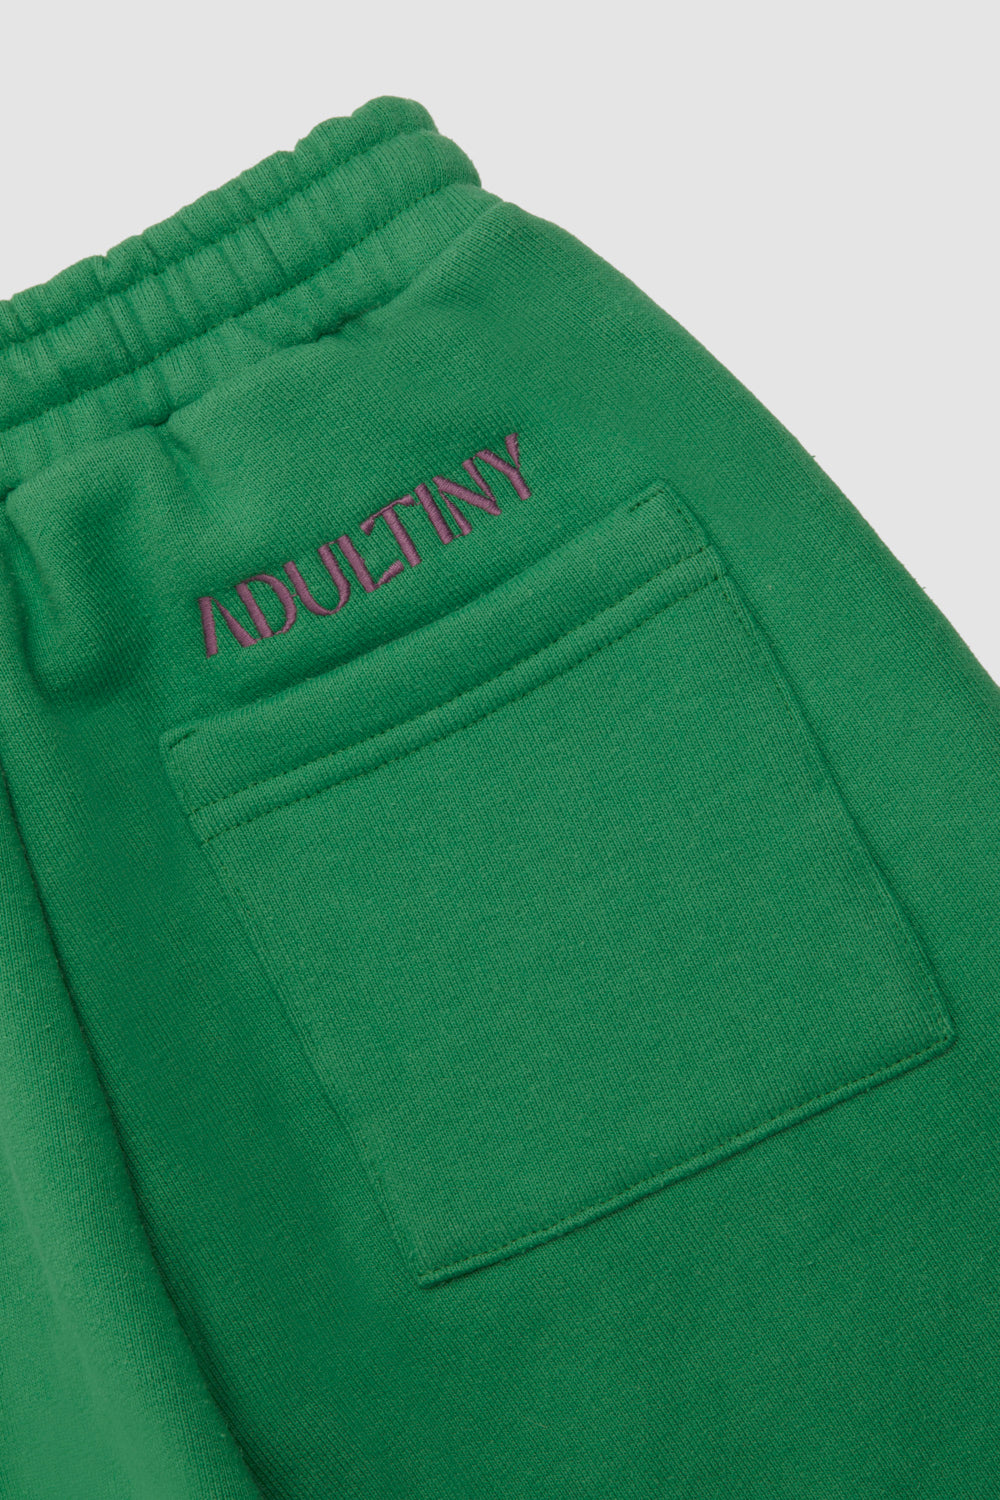 Green Track Trousers